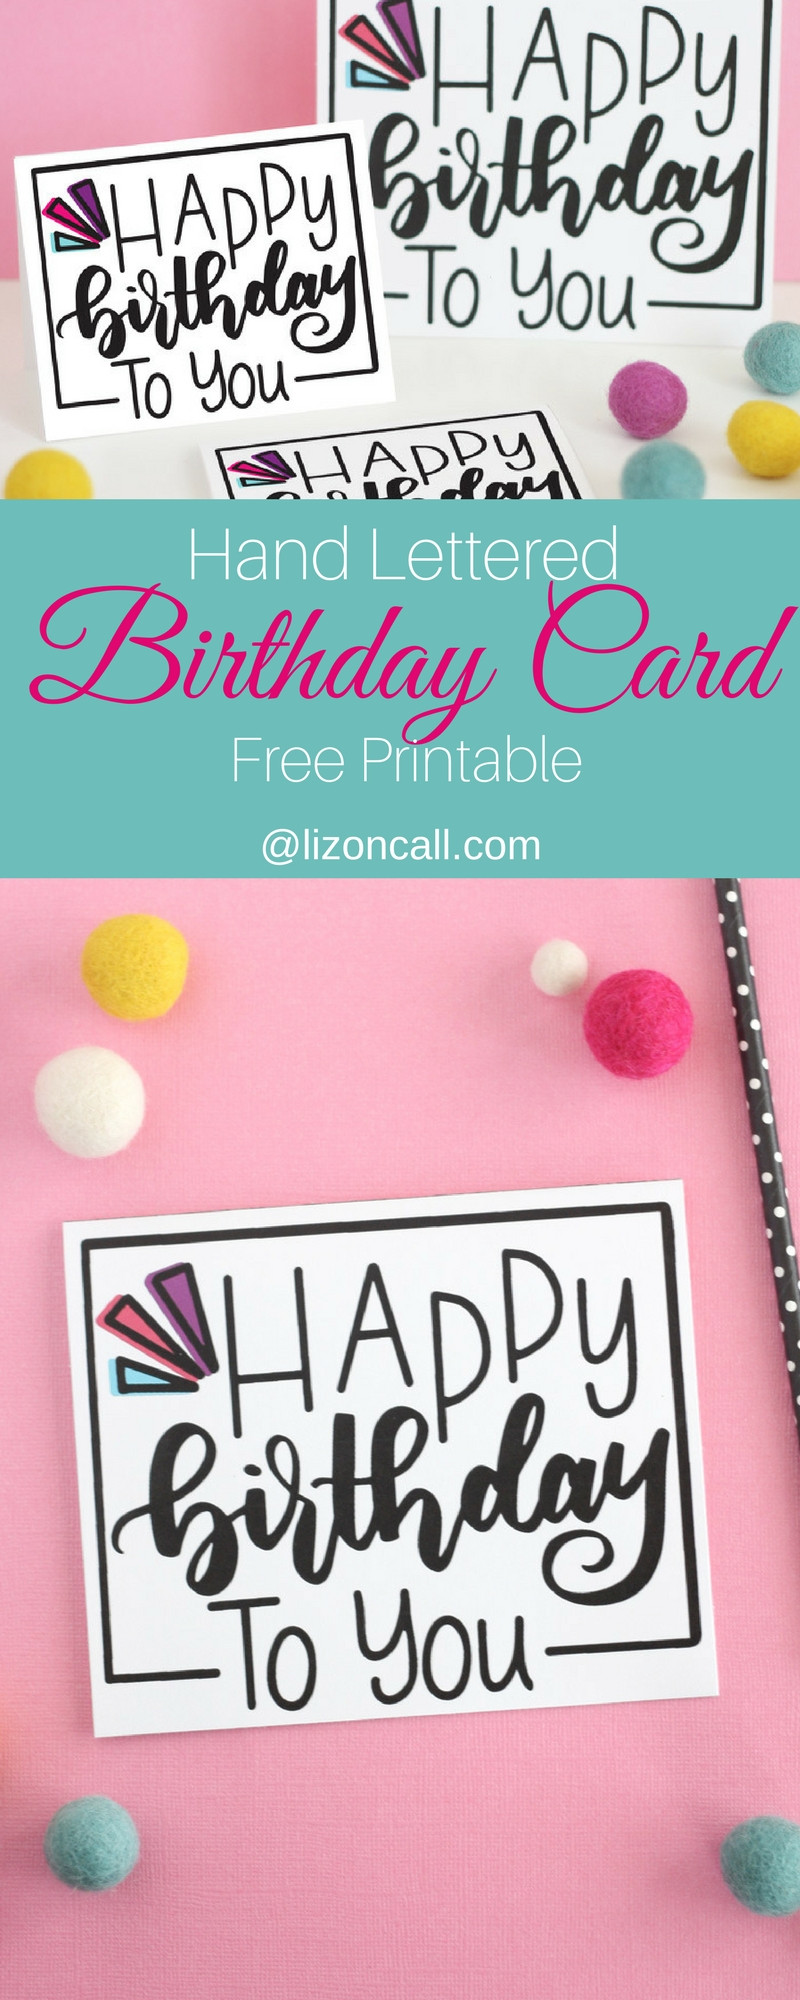 Free Printable Birthday Cards
 Hand Lettered Free Printable Birthday Card Liz on Call